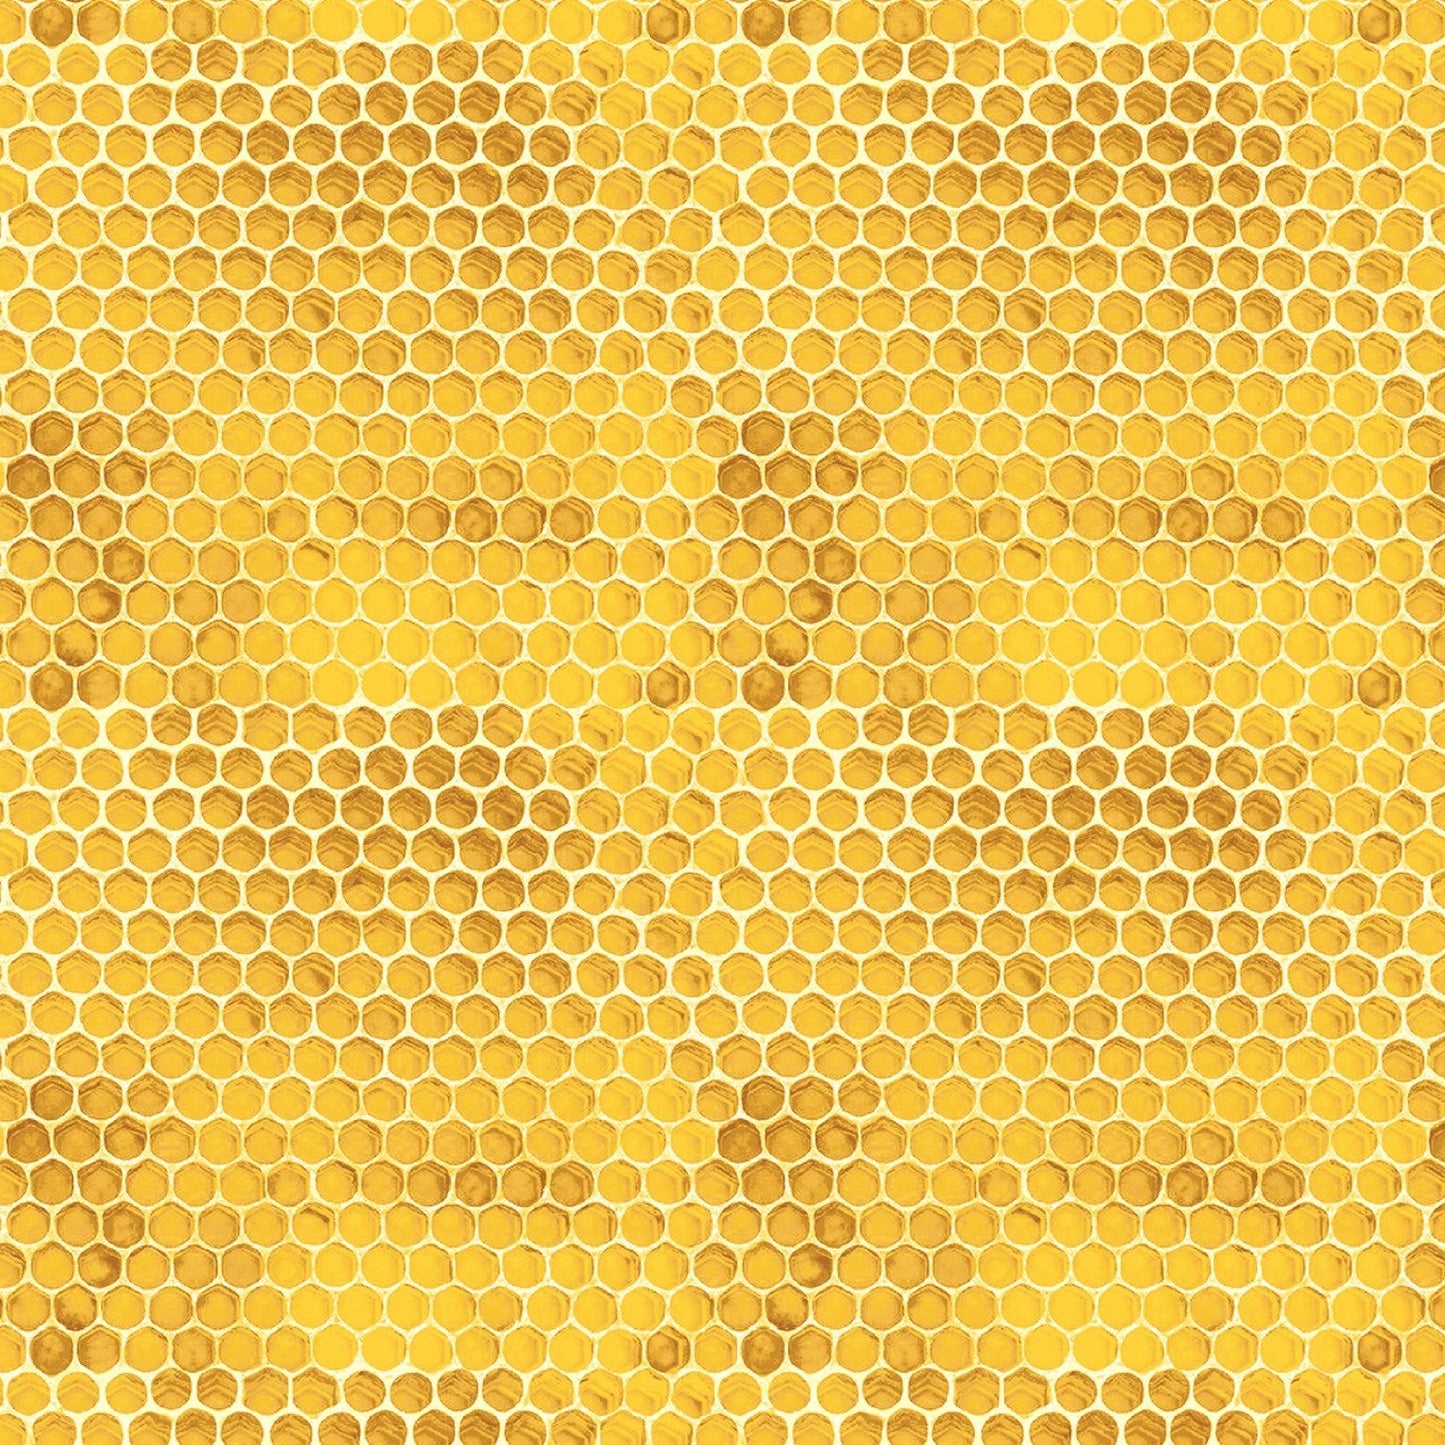 Honey Comb Background Images – Browse 325,244 Stock Photos